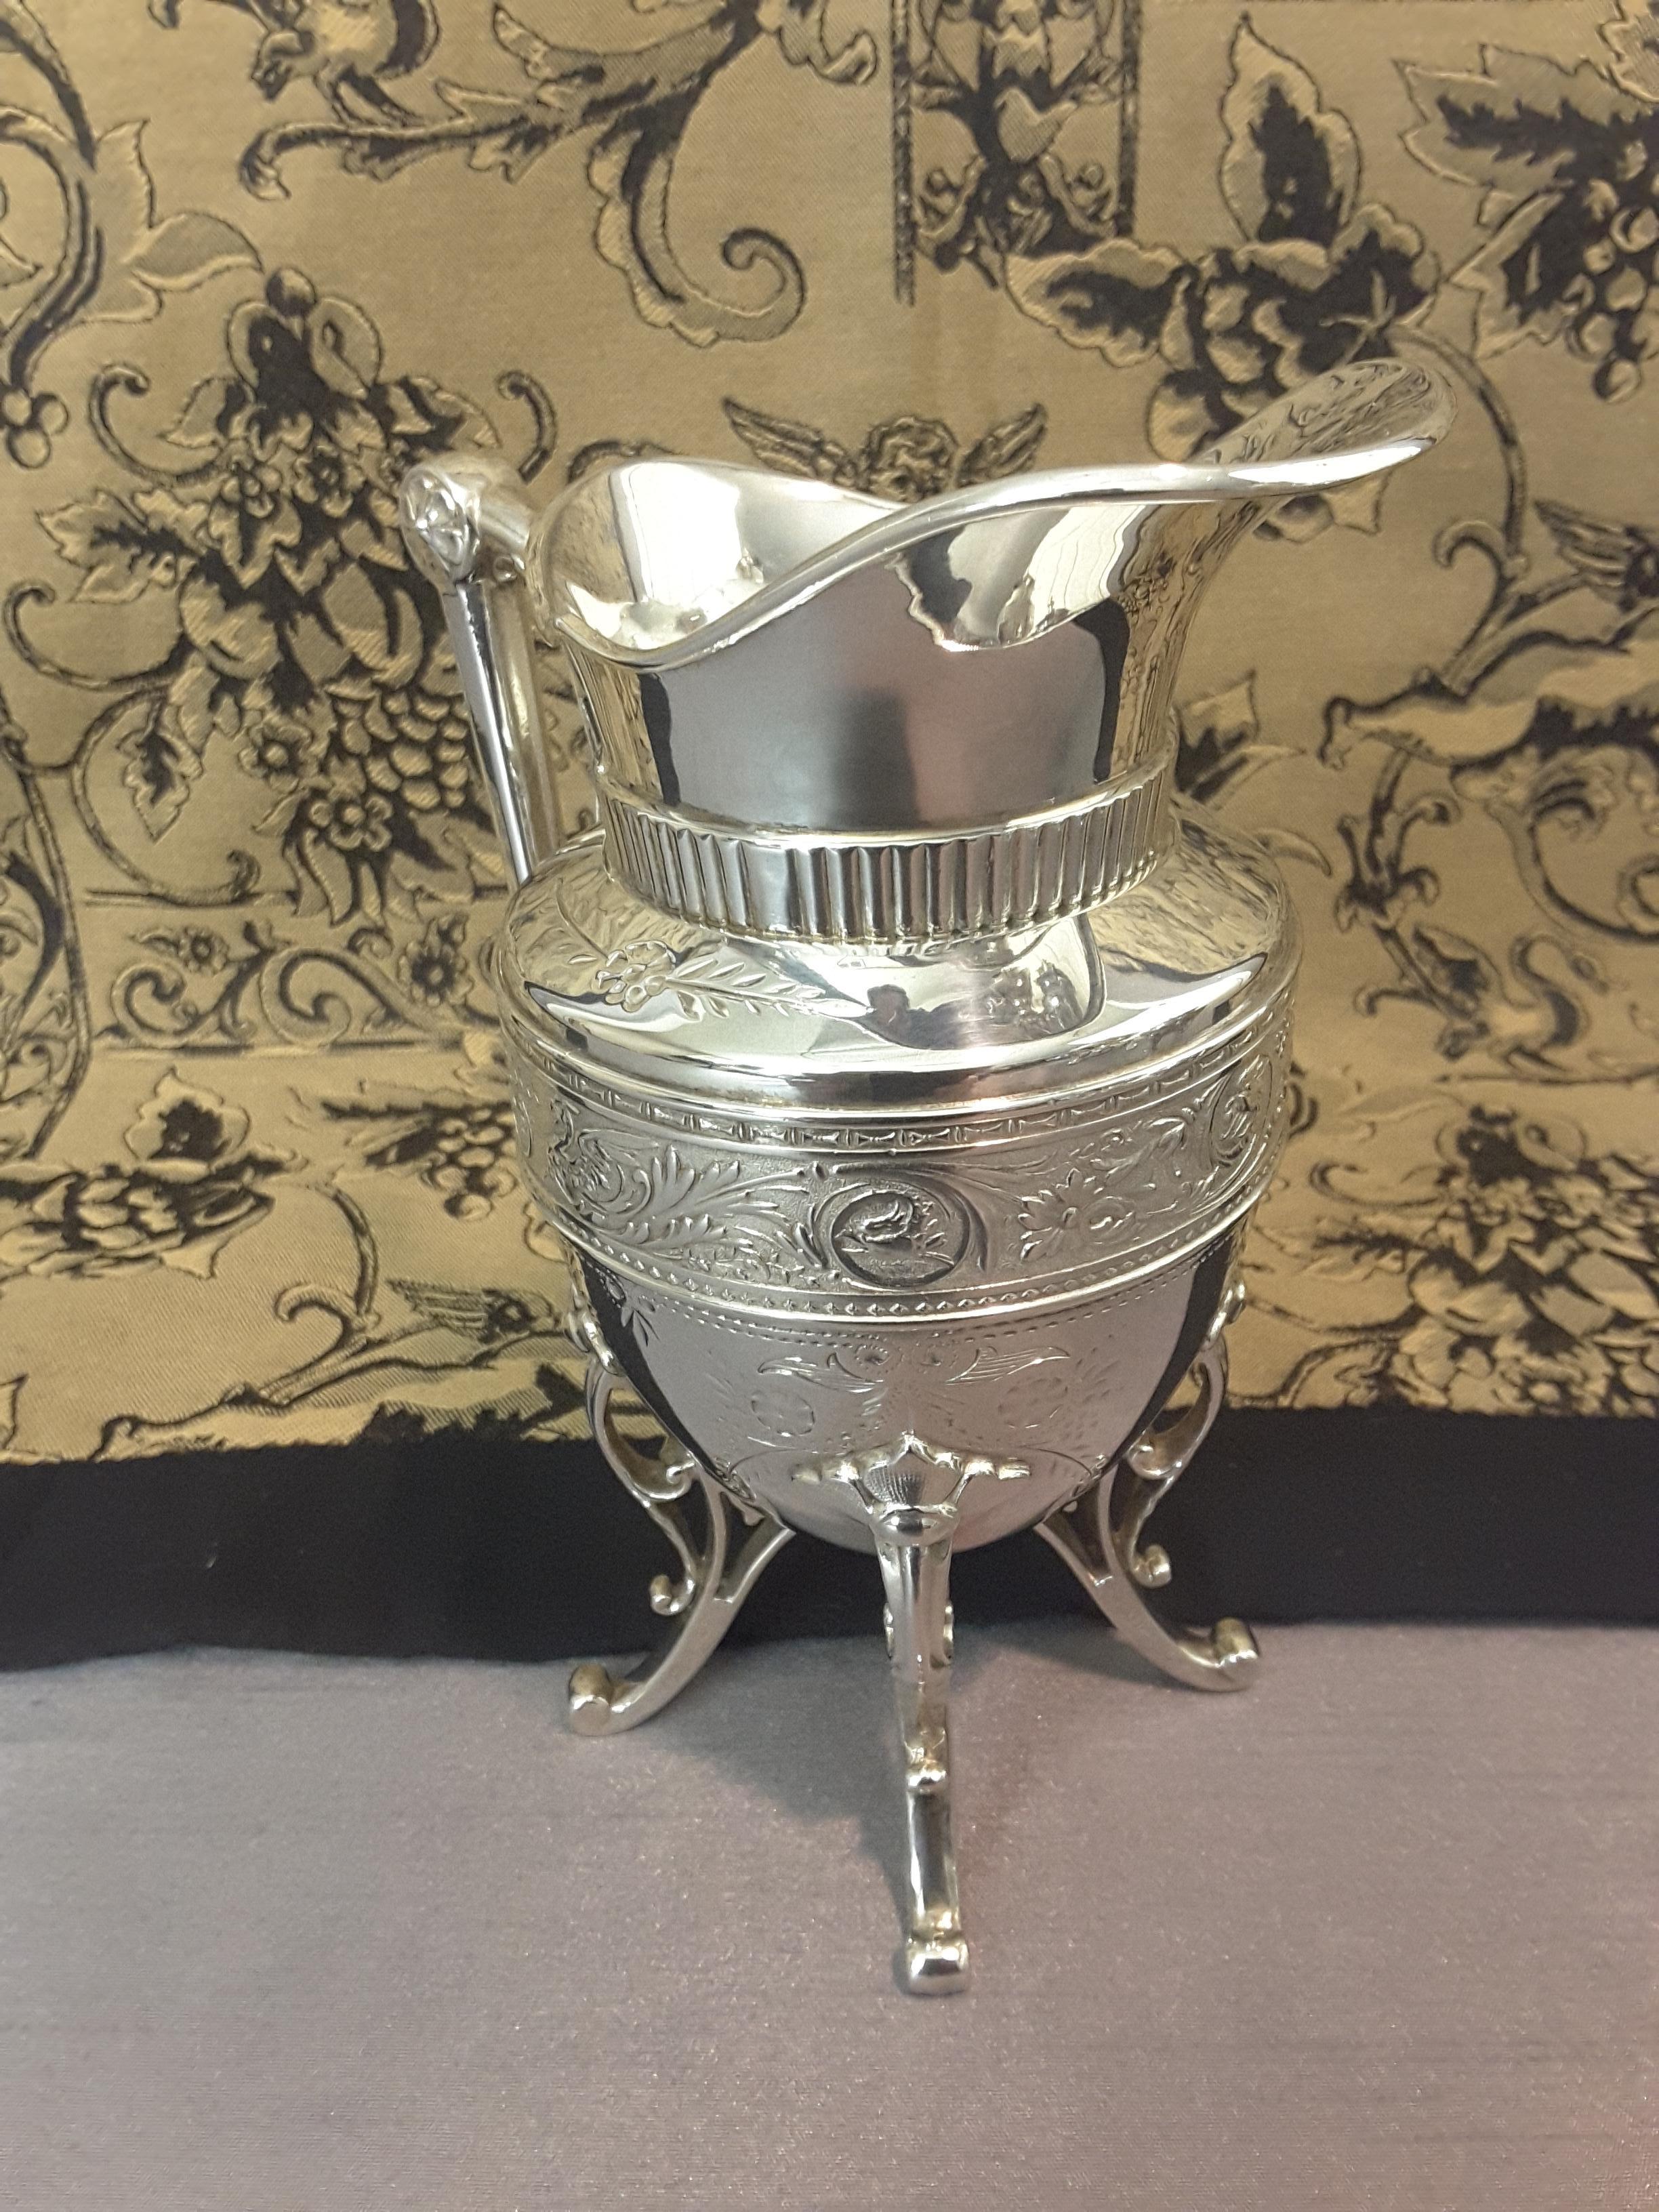 Exquisite Aesthetic Movement Silverplated Tea Service by Simpson, Hall & Miller For Sale 5